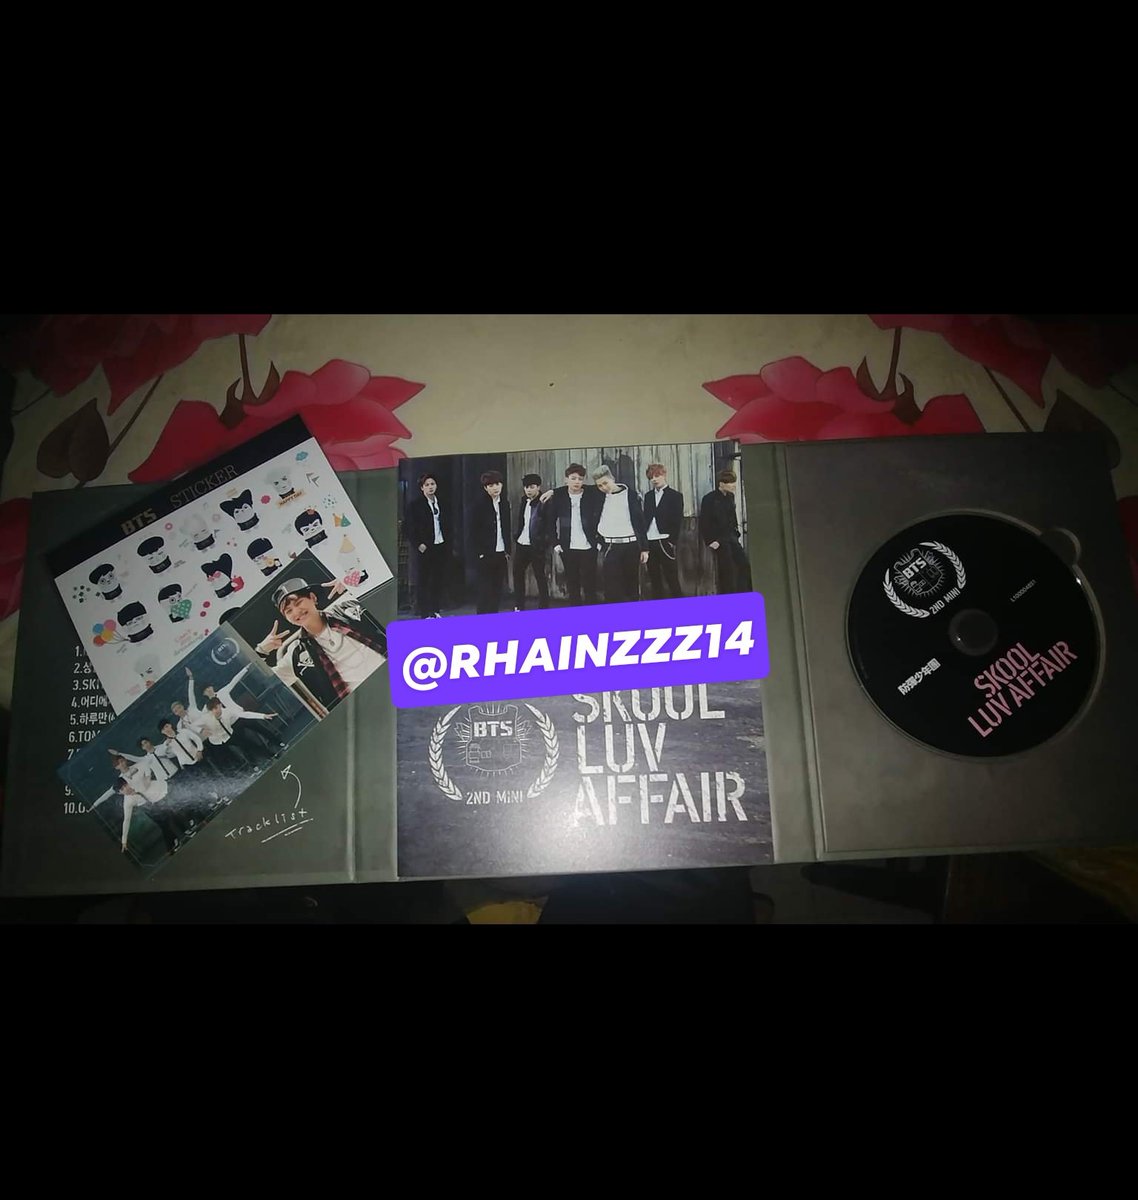 MY MERCH'S THAT I BOUGHT FROM  @7DistrictShopPH First Purchase, I bought this wala pa ung buong  @7DistrictShopPH  @7thDistrictPH.. i asked if there's available BTS albums.. and may SKOOL LUV AFFAIR daw! Grabe i was so happy talaga nun! So i bought it right away [thread]